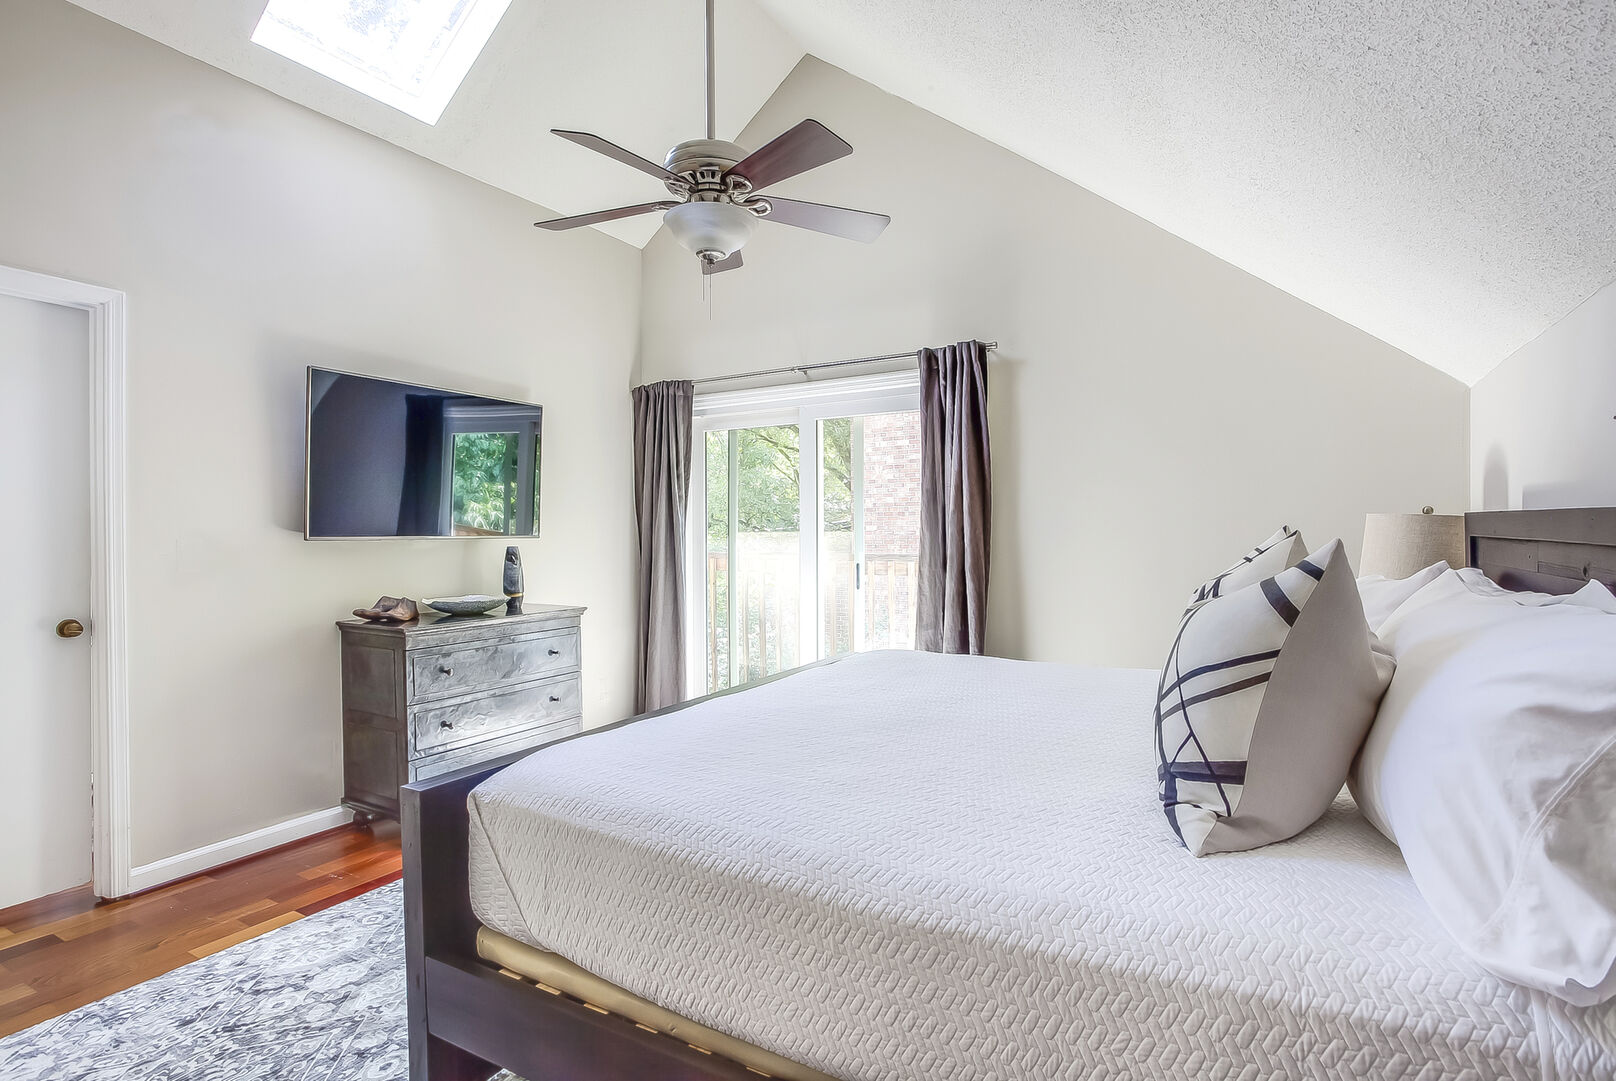 This Poncey Highlands Rental has a master bedroom with TV and sliding class door